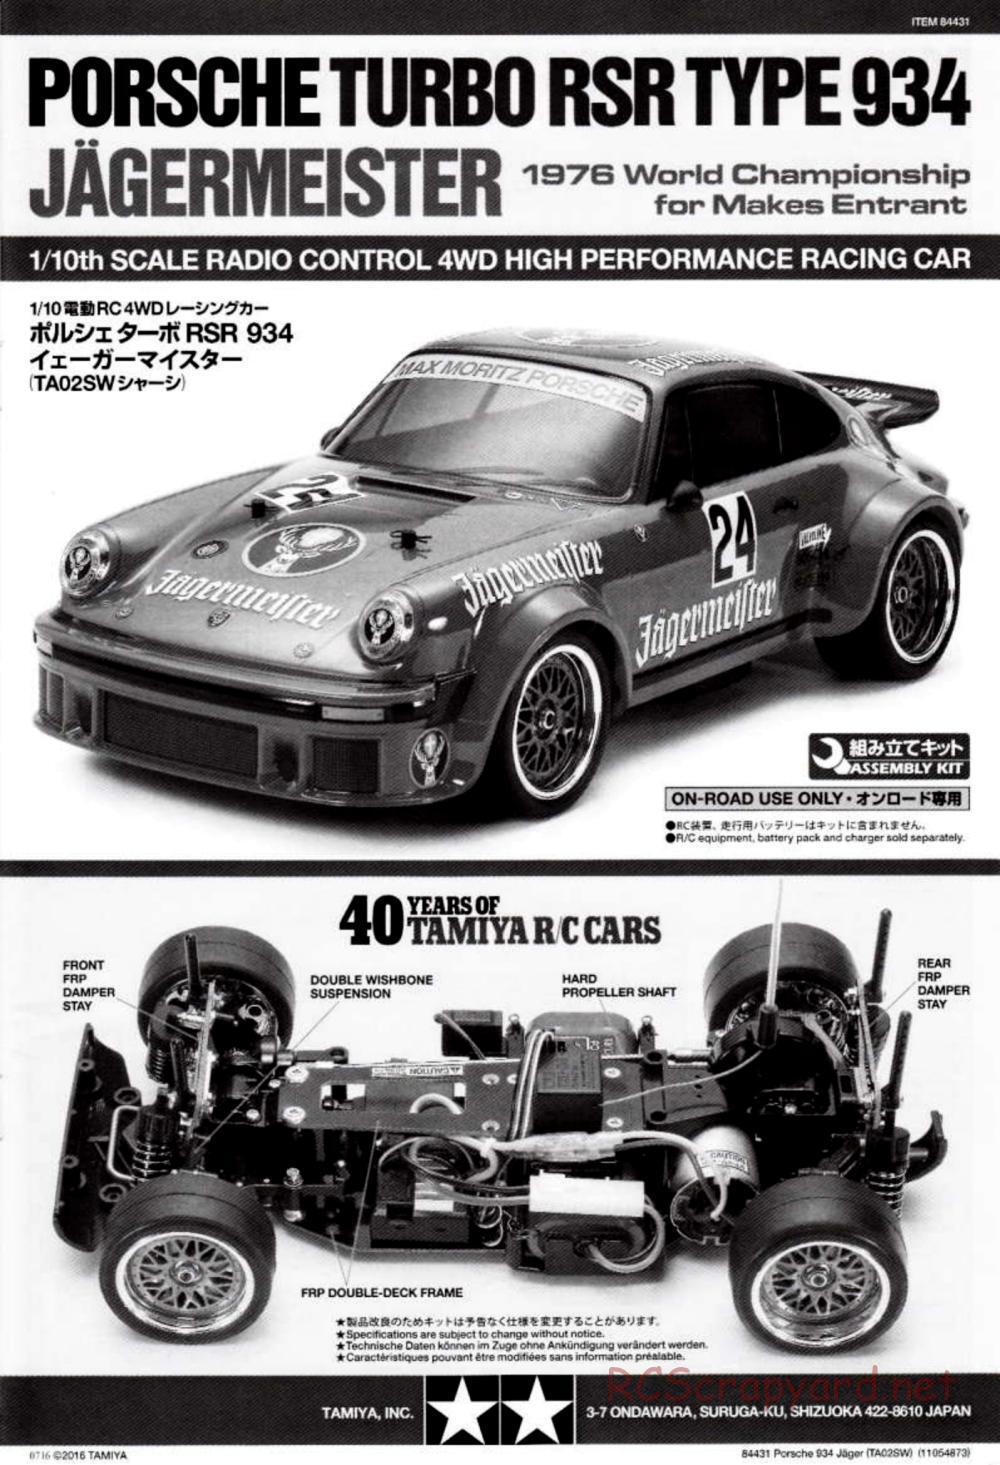 Tamiya - Porsche Turbo RSR Type 934 Jagermeister - TA-02SW Chassis - Manual - Page 1